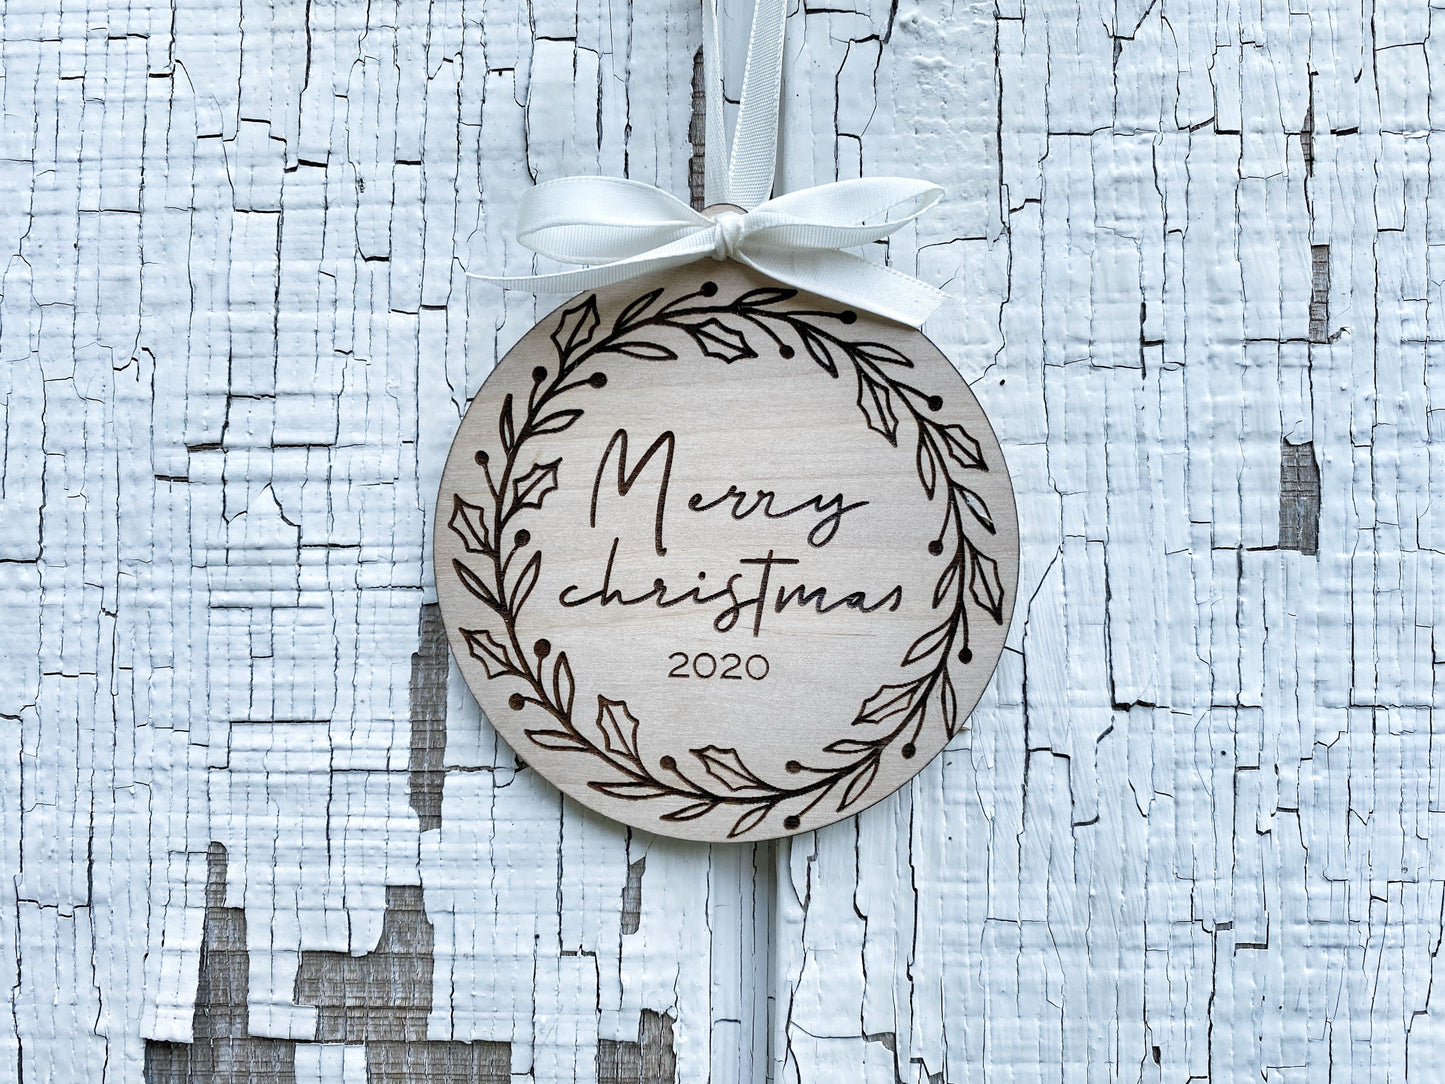 2021 Ornament Personalized with First Name and Year, Laser Cut & Engraved Wood Ornament, Made Shipped USA